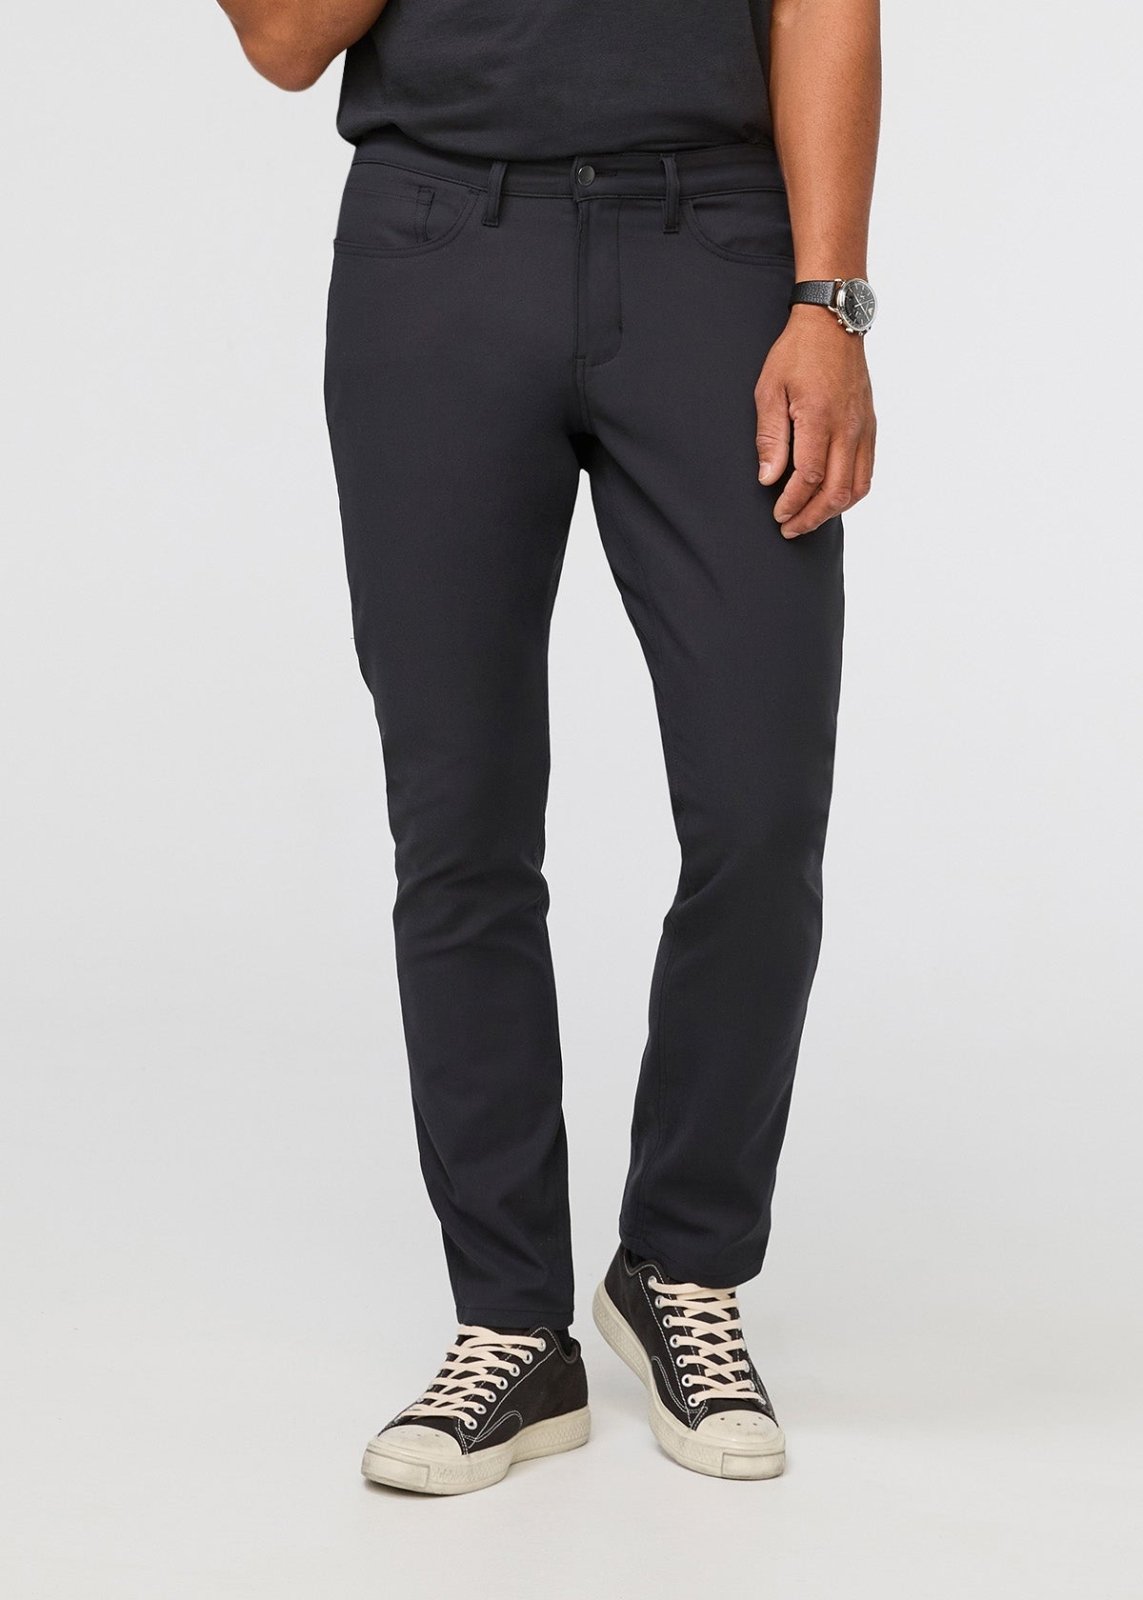 Men's Stretch Pants - Performance by DUER – Tagged 